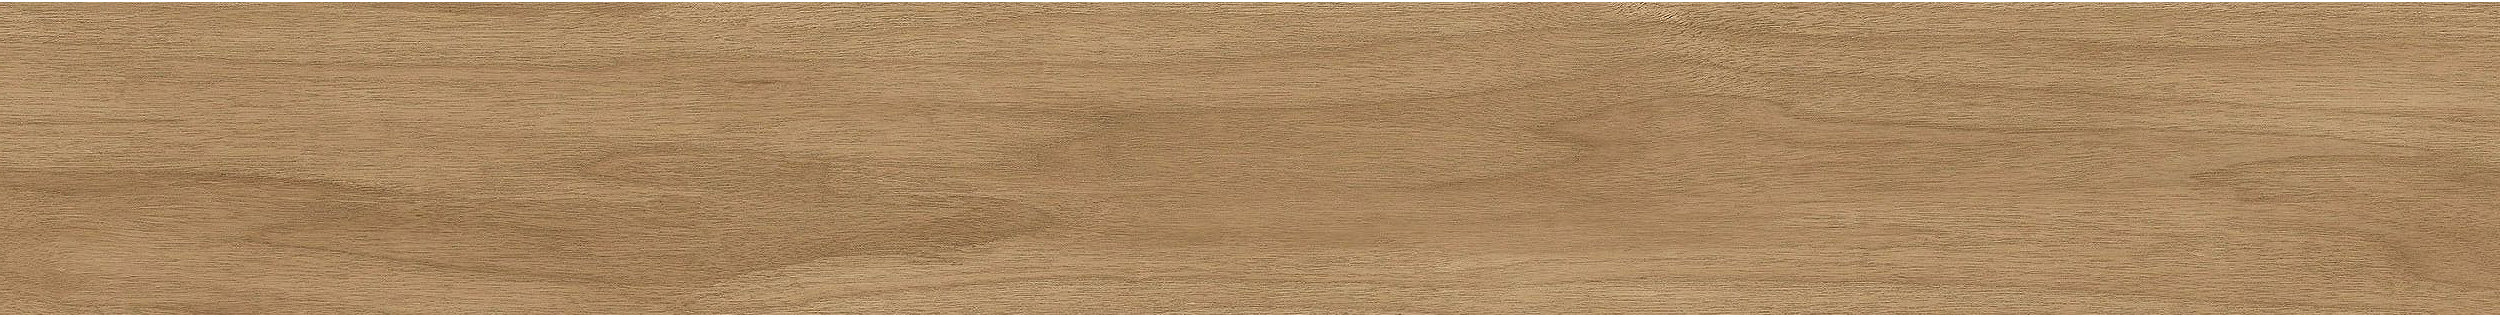 Criterion Classic Woodgrains LVT In Washed Maple image number 4